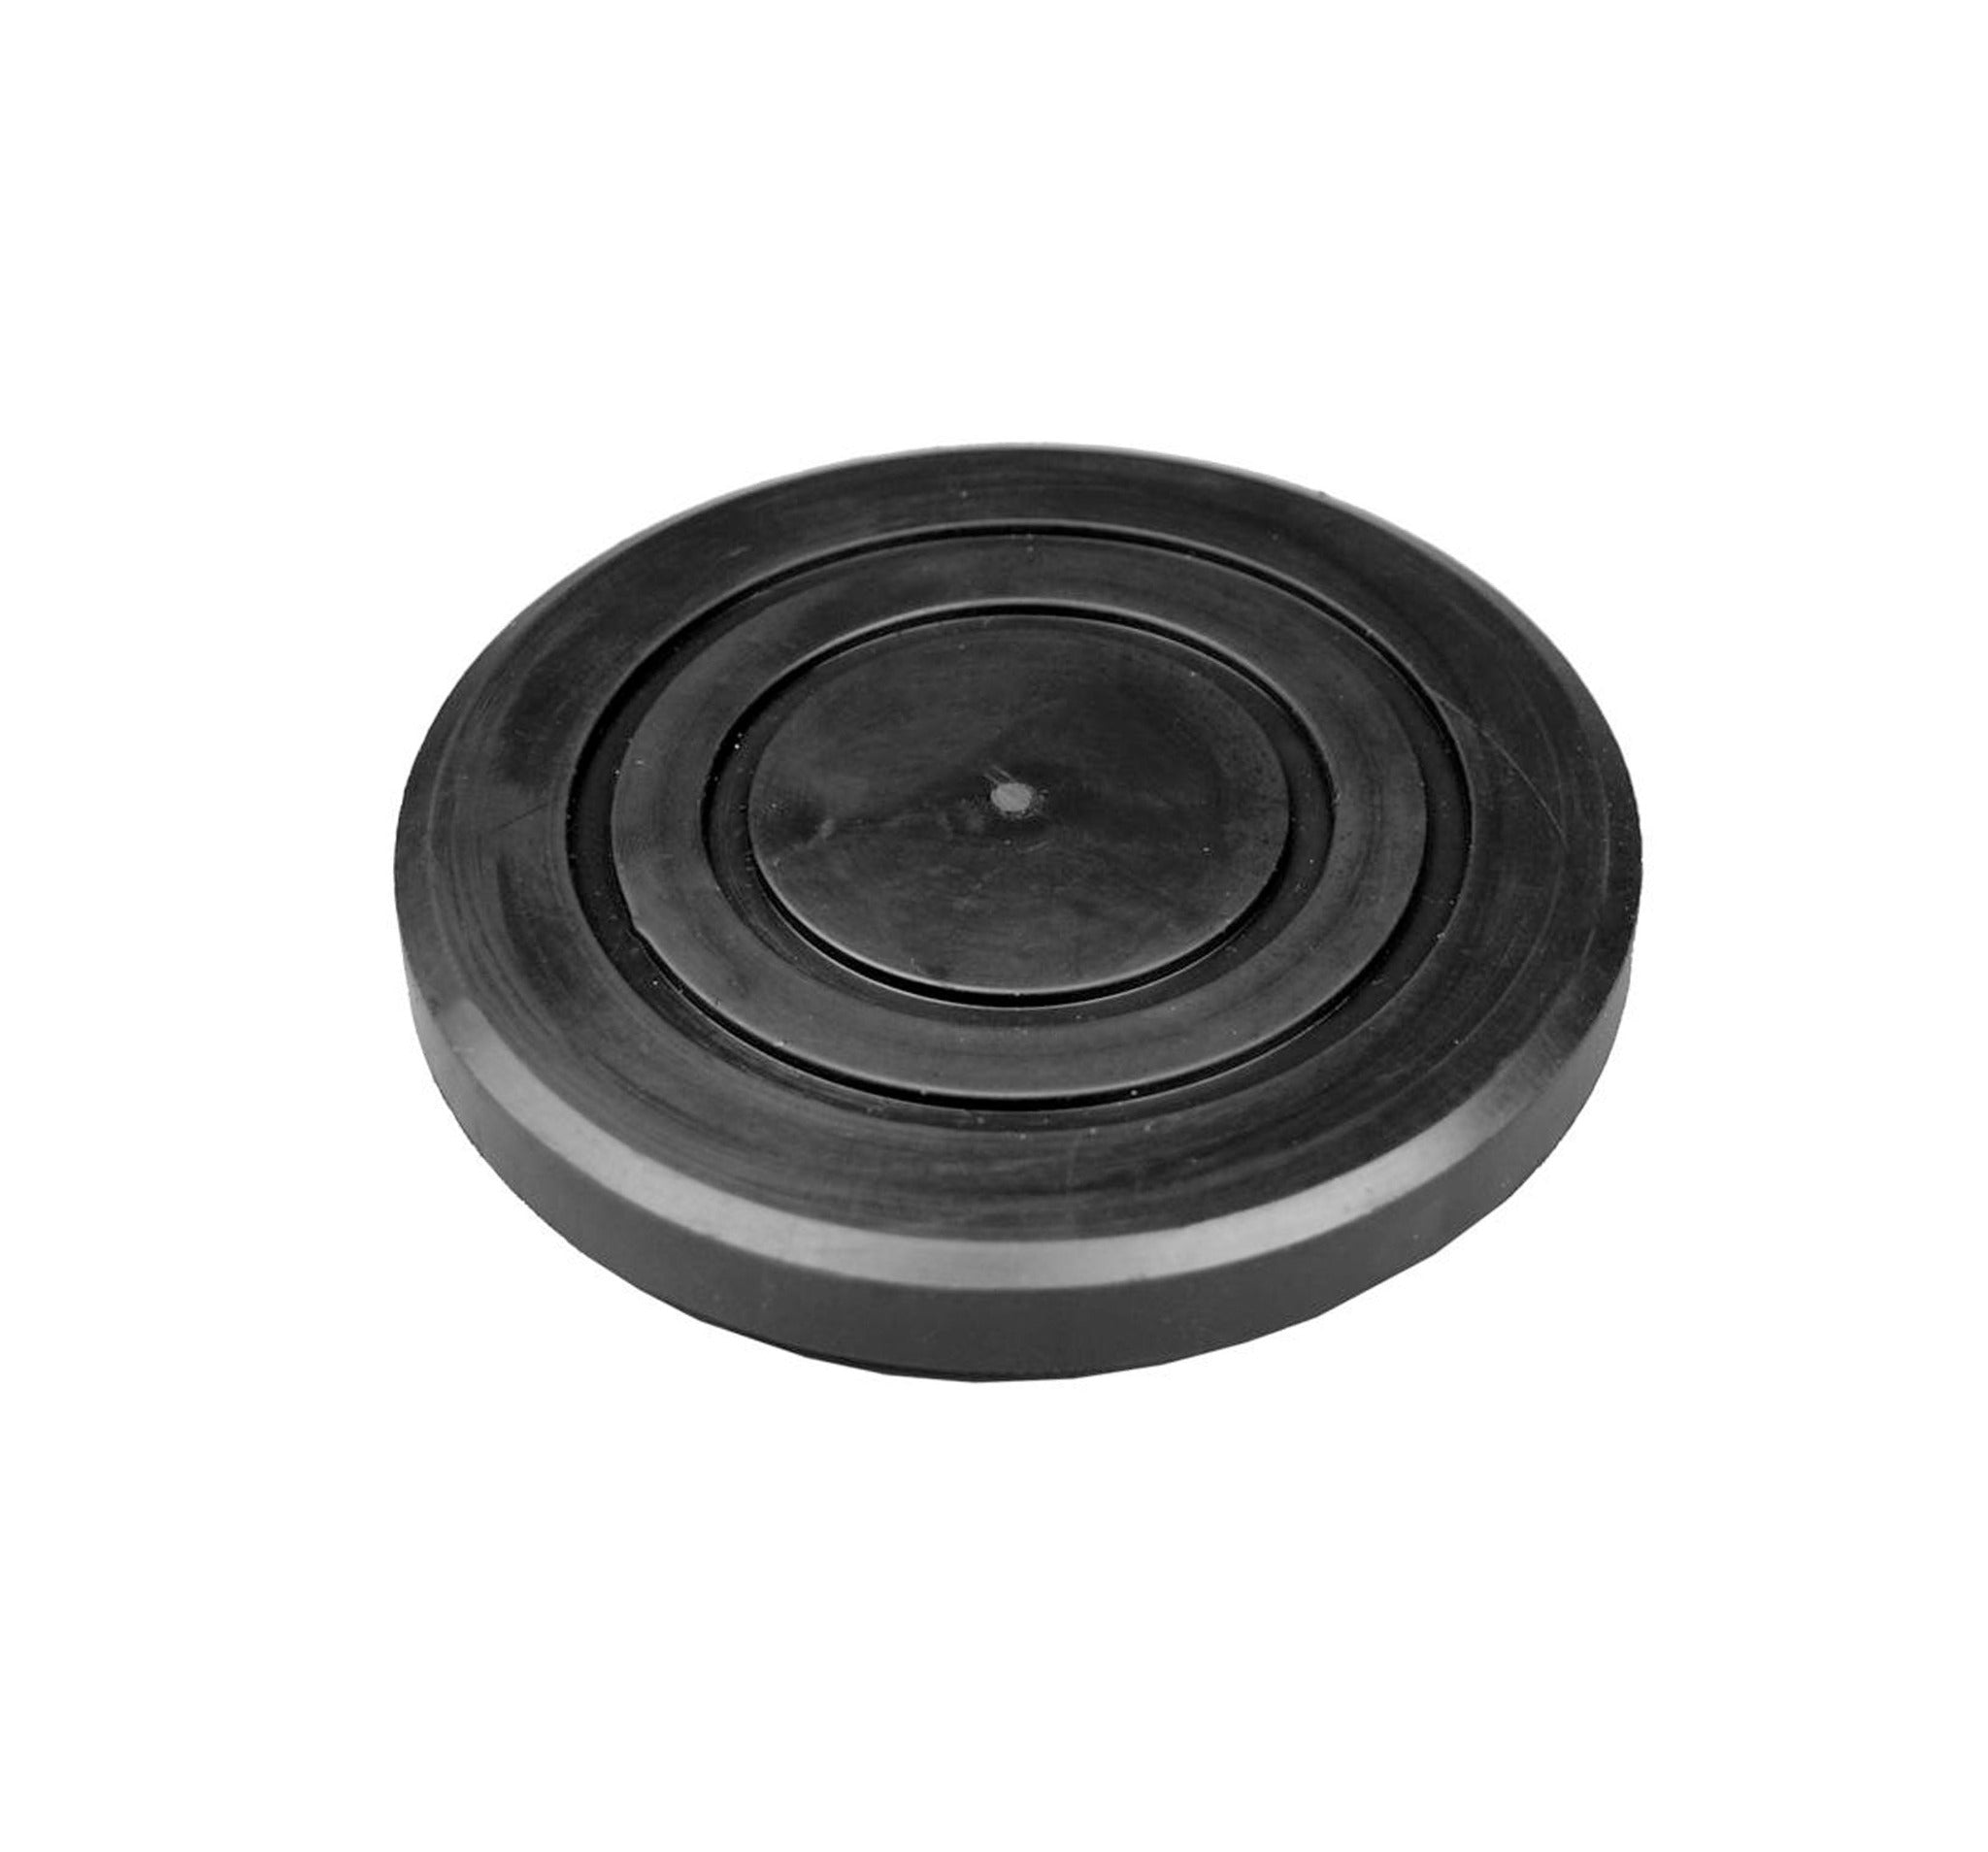 QUALITY LIFT ROUND RUBBER PADS for OLDER STYLE